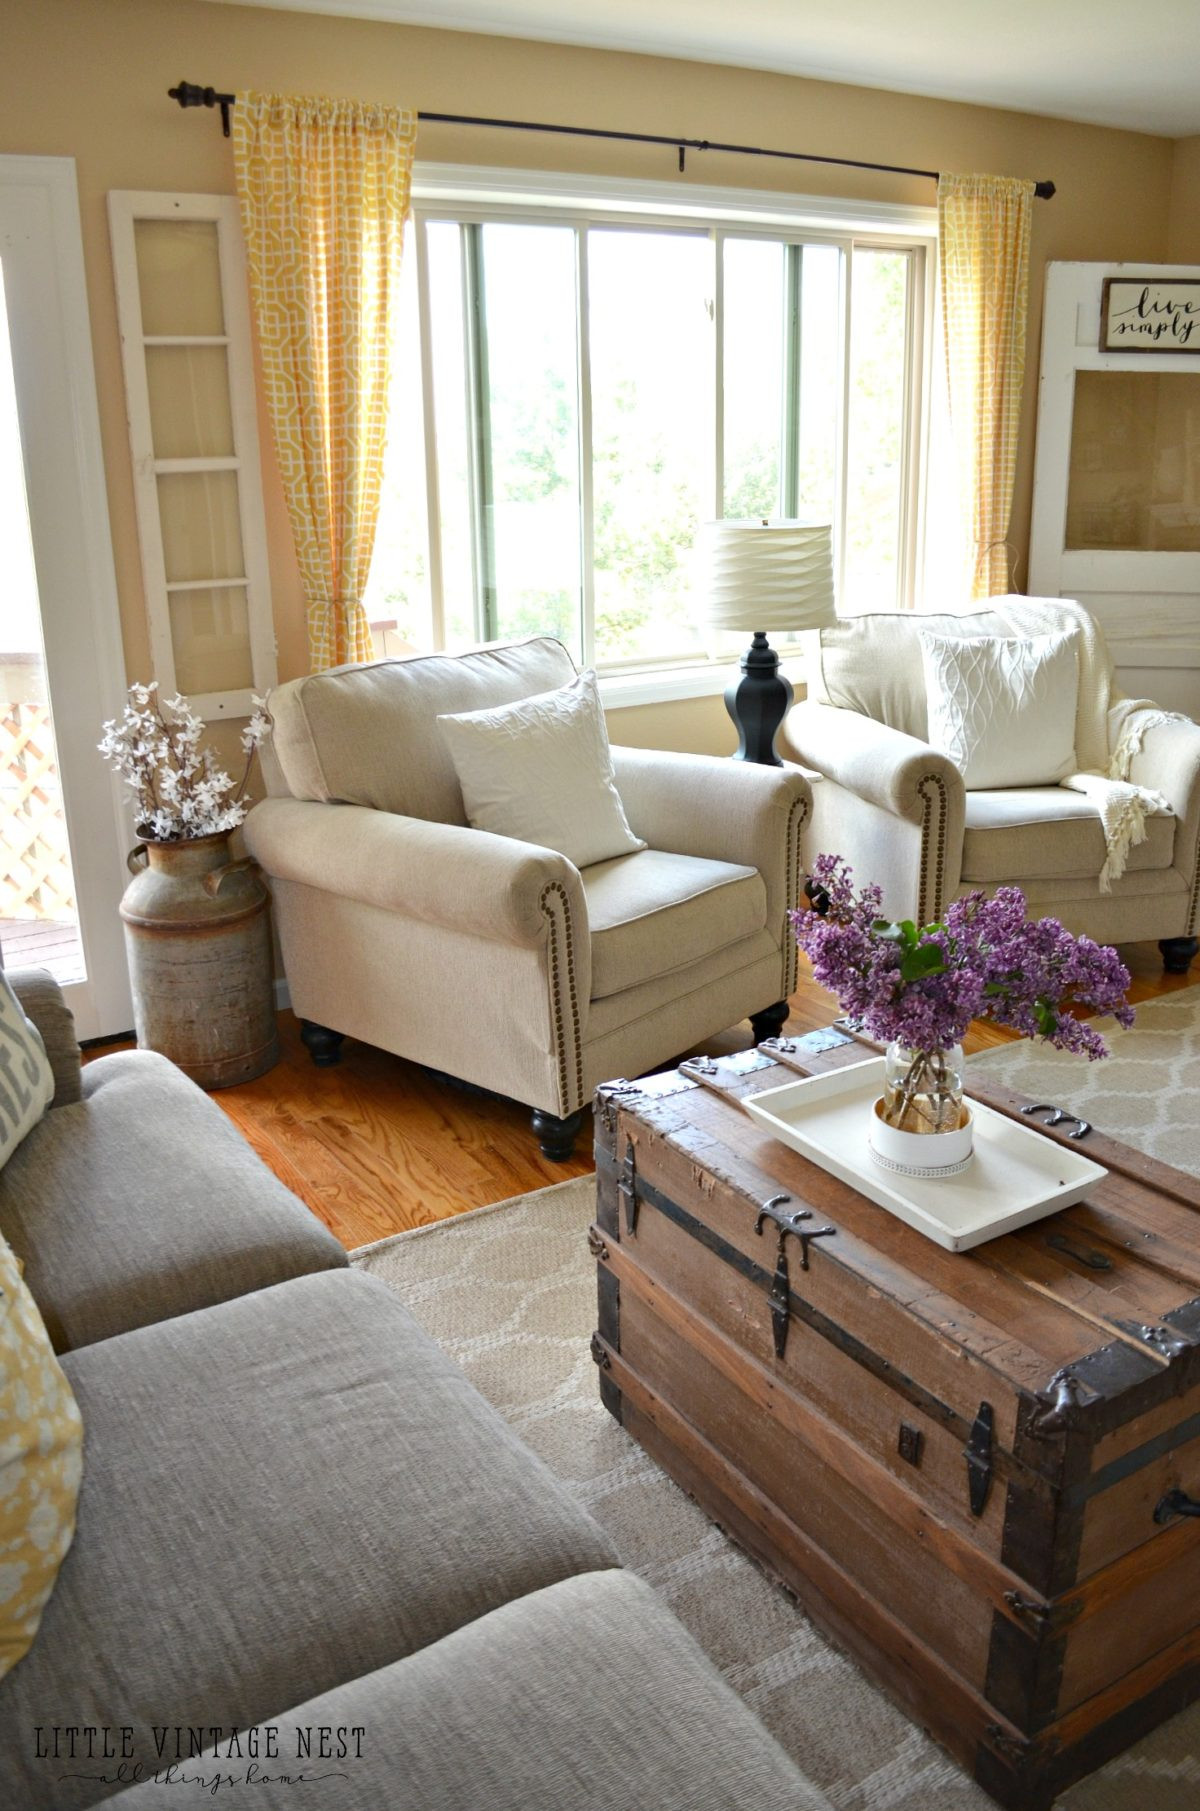 Farmhouse Living Room Chairs
 How I Transitioned to Farmhouse Style Little Vintage Nest